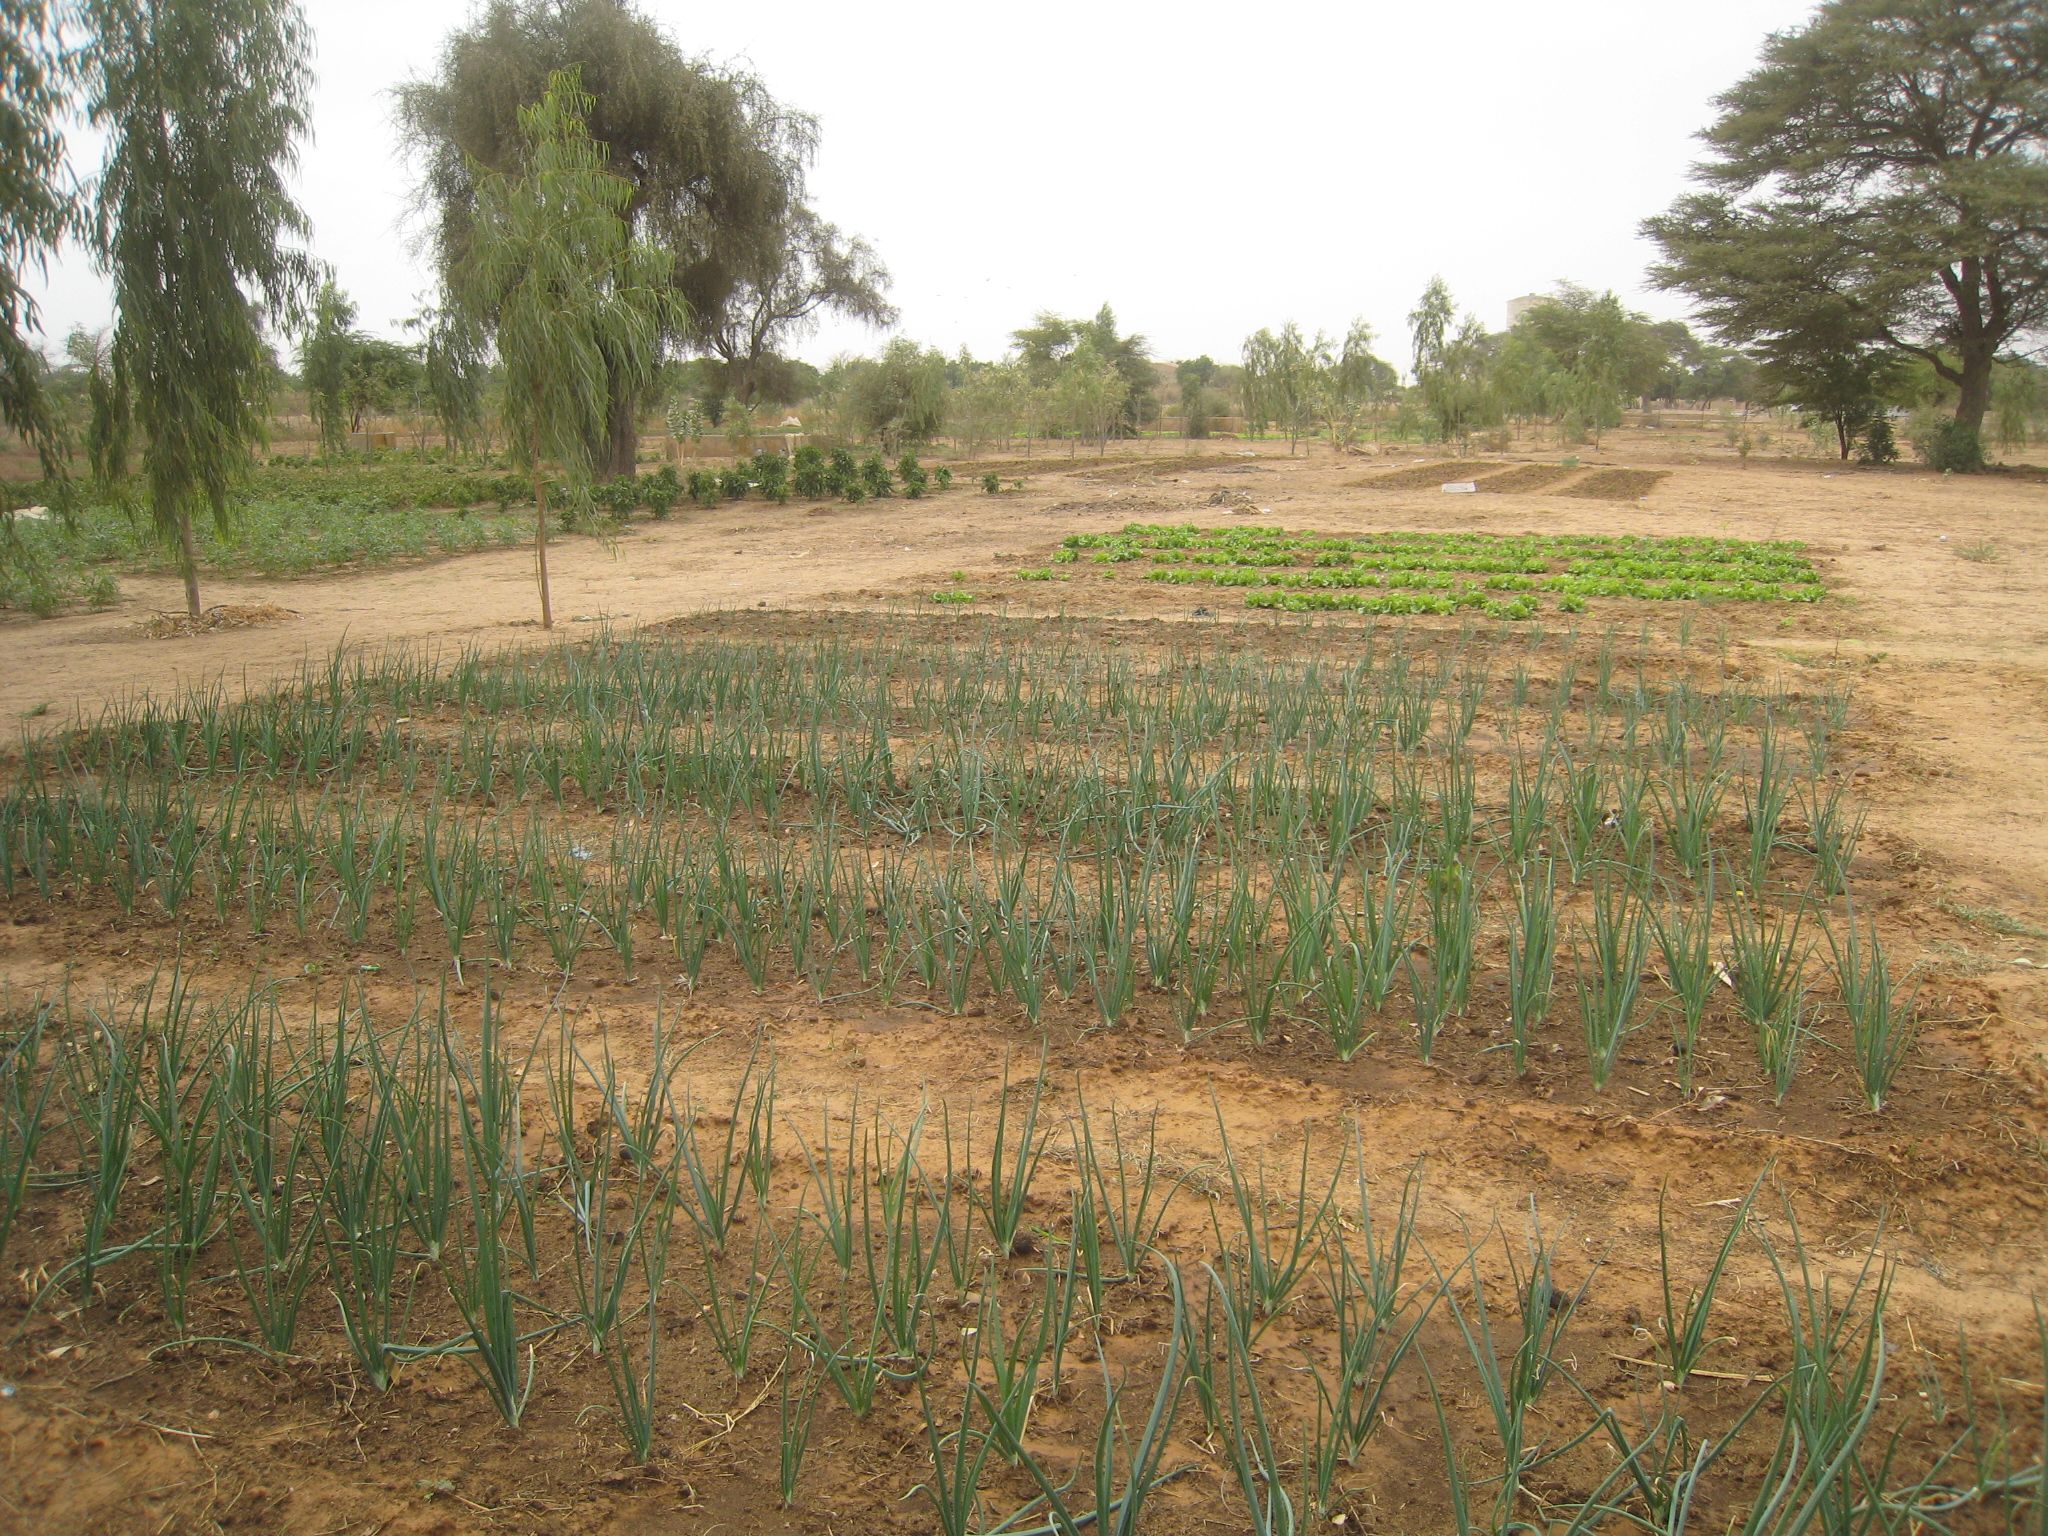 Thanks to water access, the Ouarkhokh cooperative is now able to produce a variety of crops, including these onions, throughout the year.